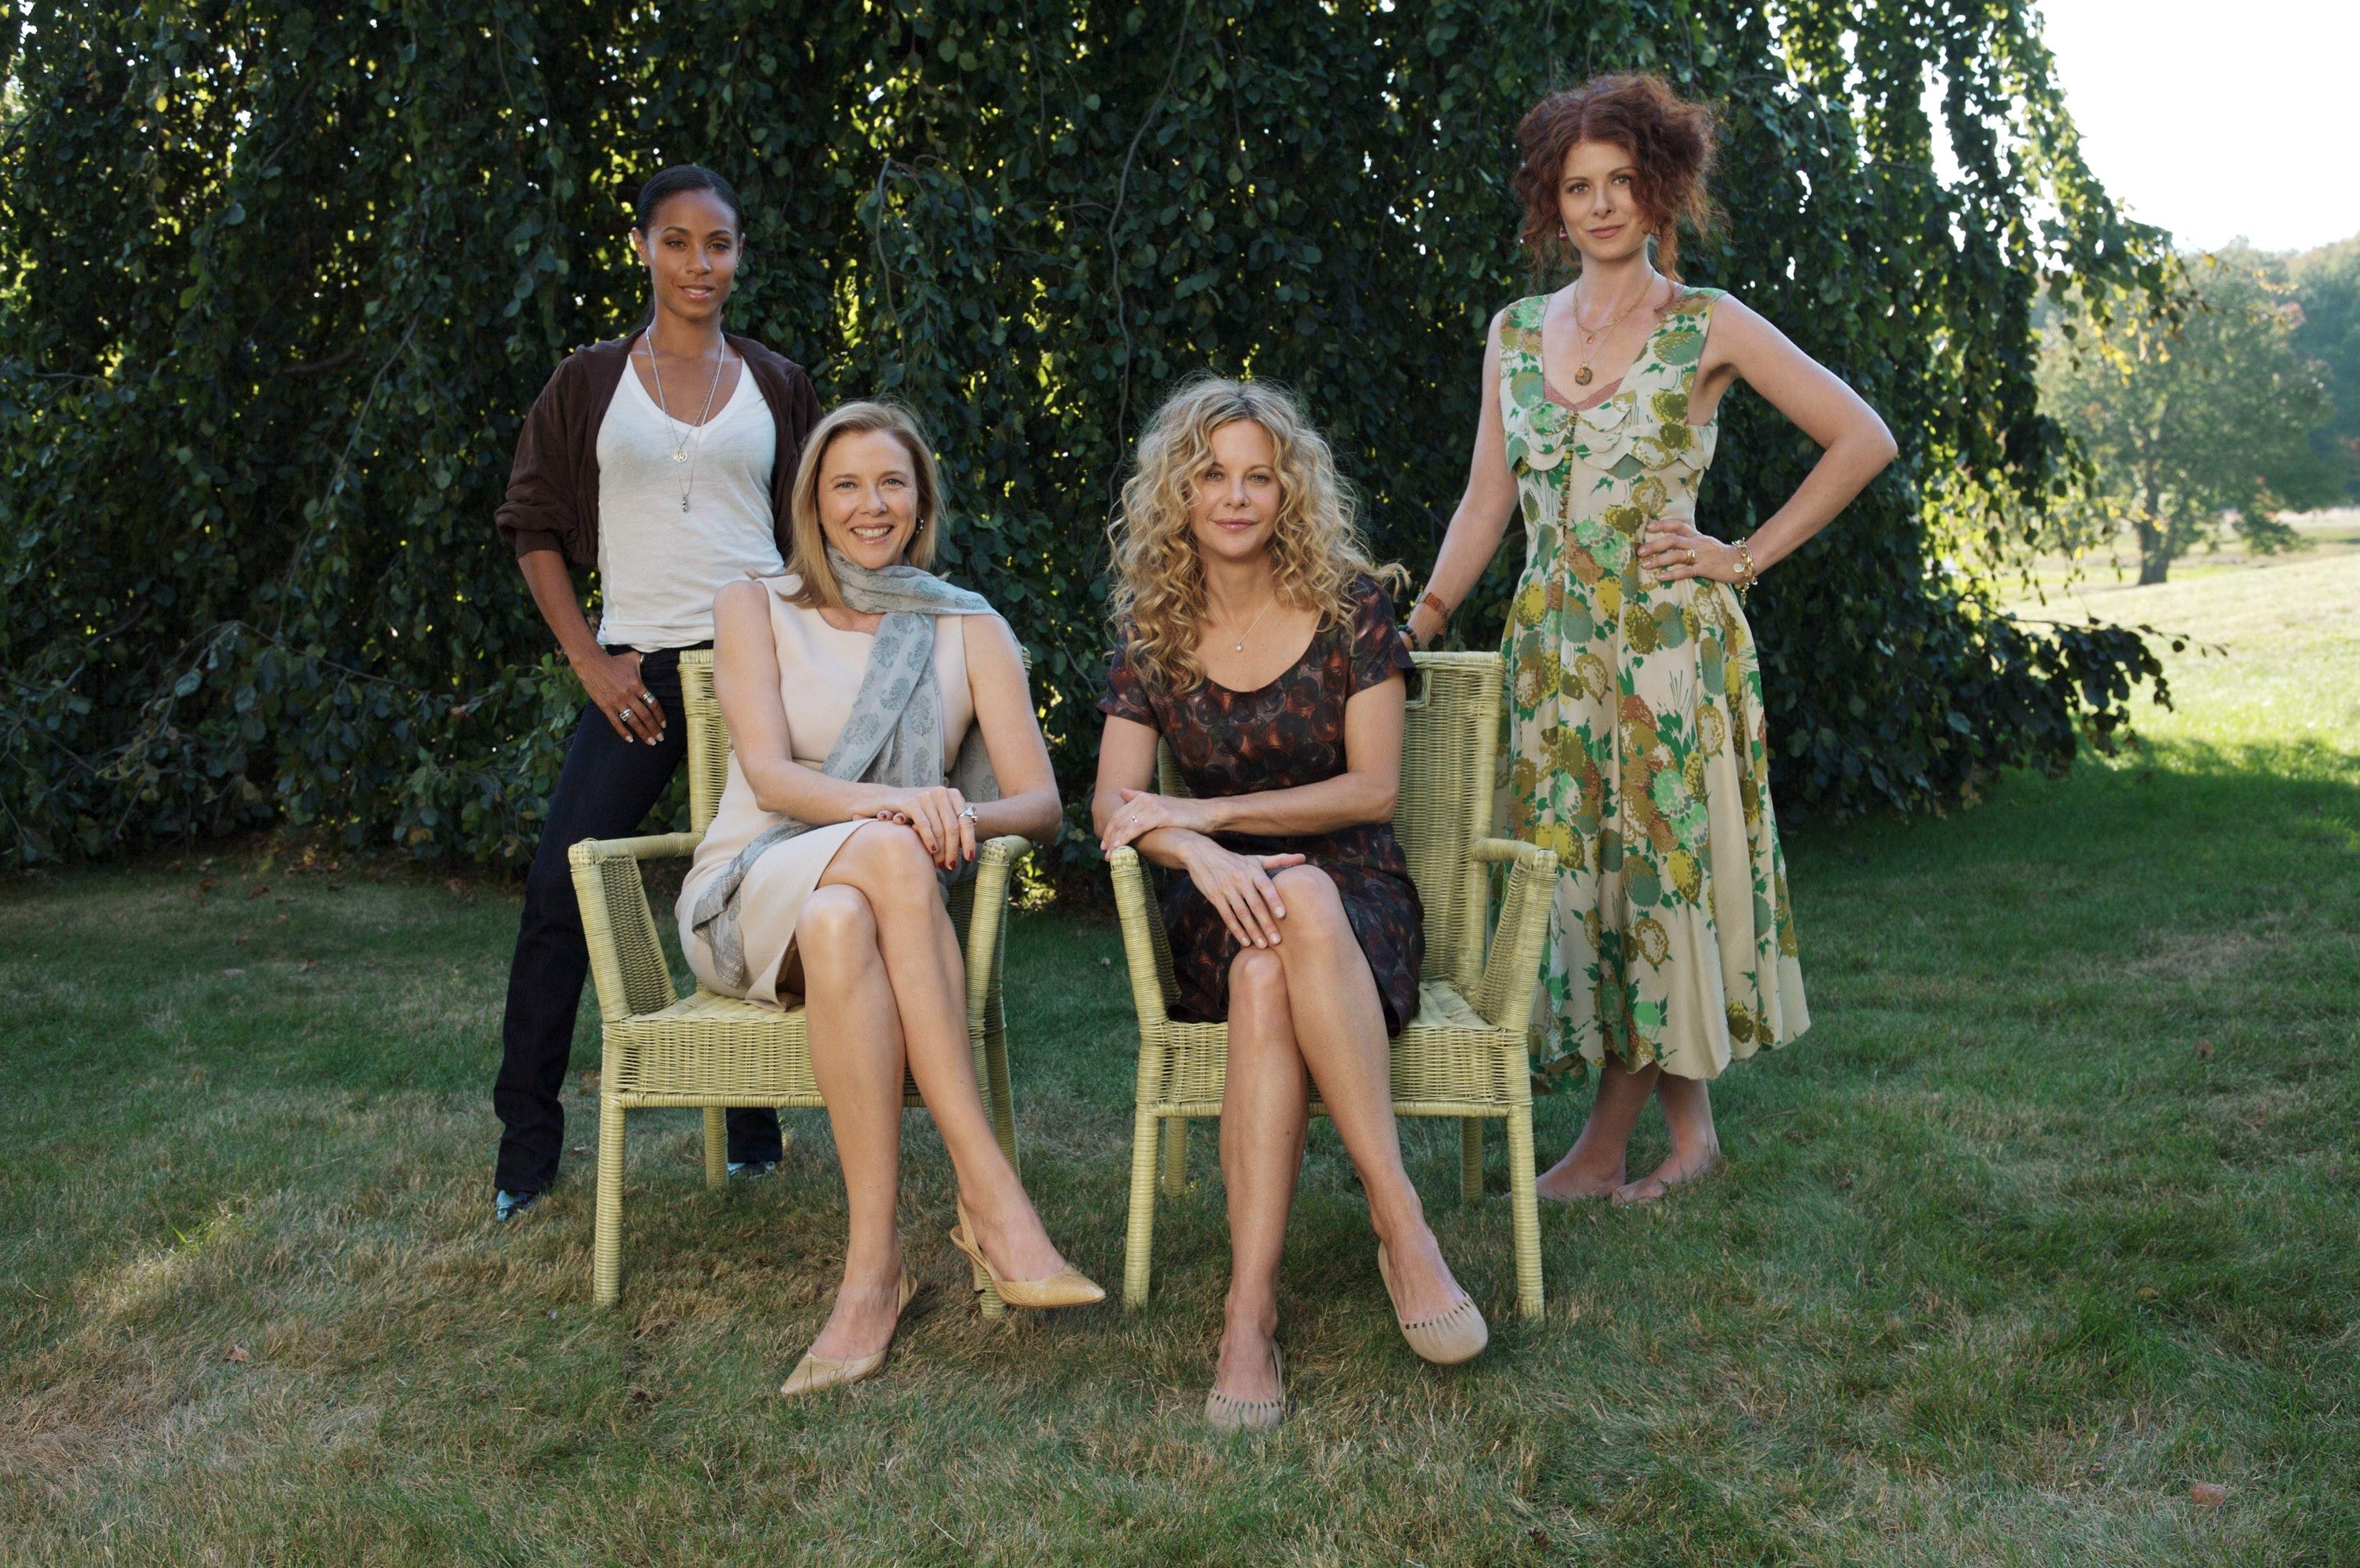 Jada Pinkett Smith, Annette Bening, Meg Ryan and Debra Messing in a scene from The Women(c), directed by Diane English 2008 - A Picturehouse release / photographer: Claudette Barius.